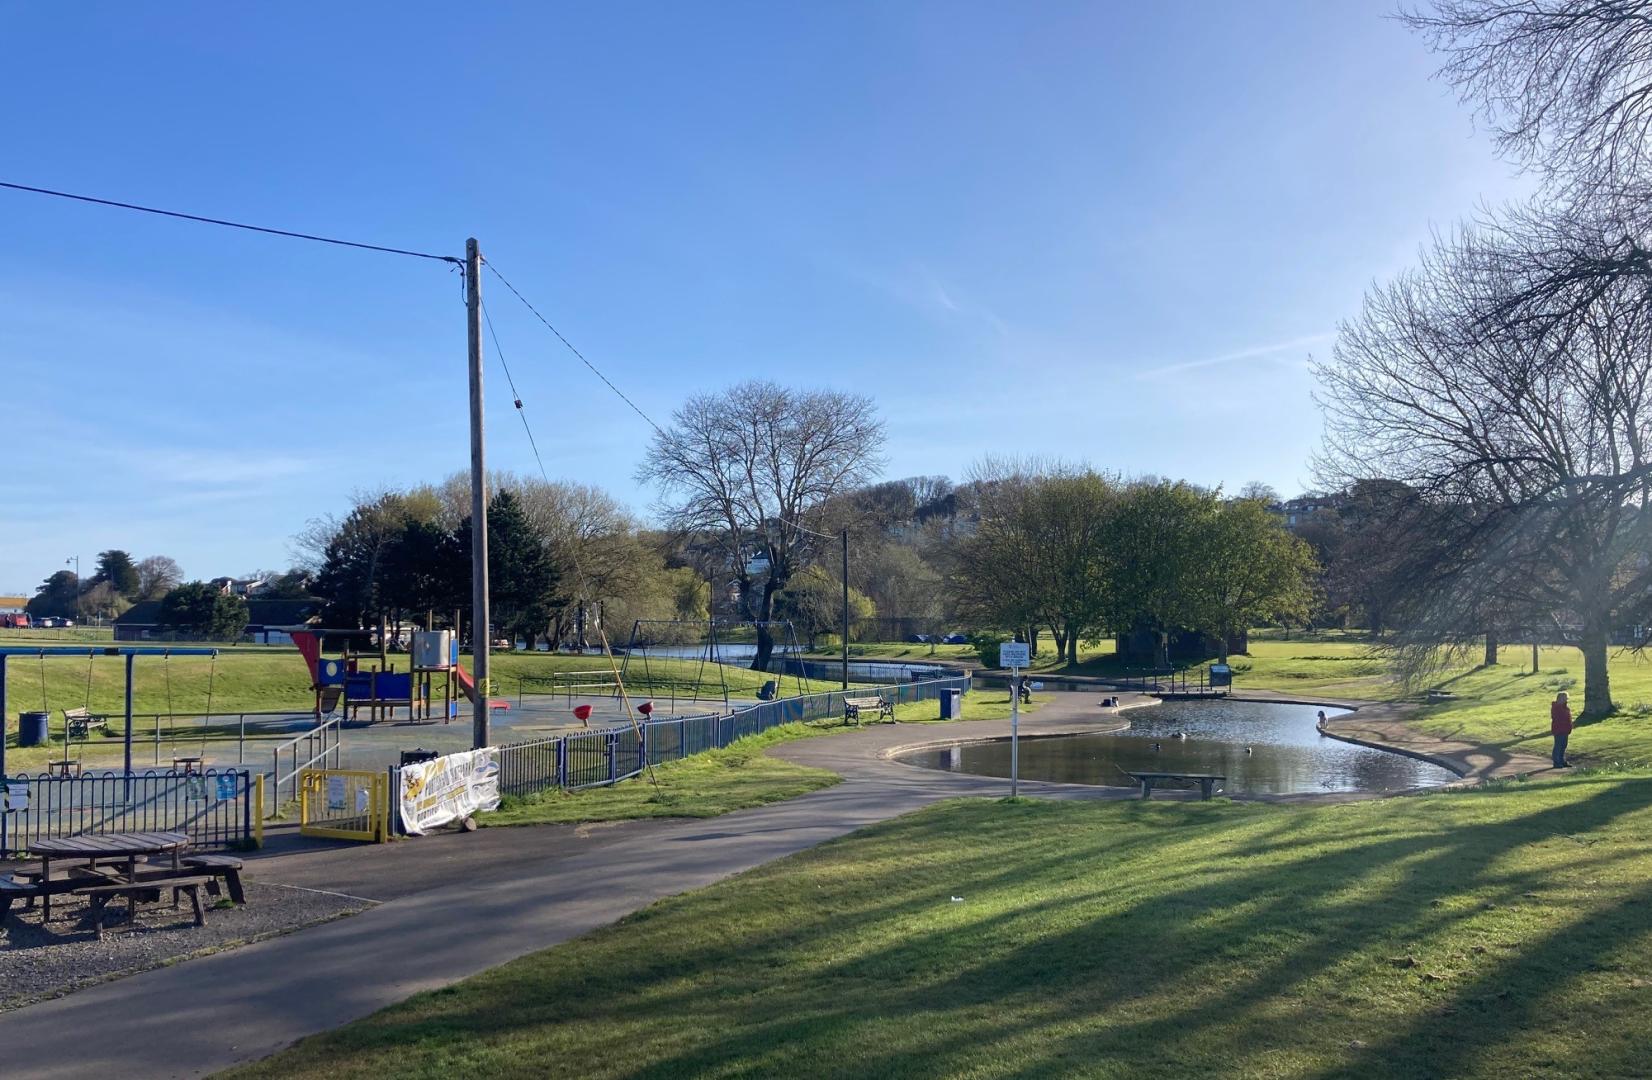 A photo of Portishead Lake Grounds showing the lake and children's play area